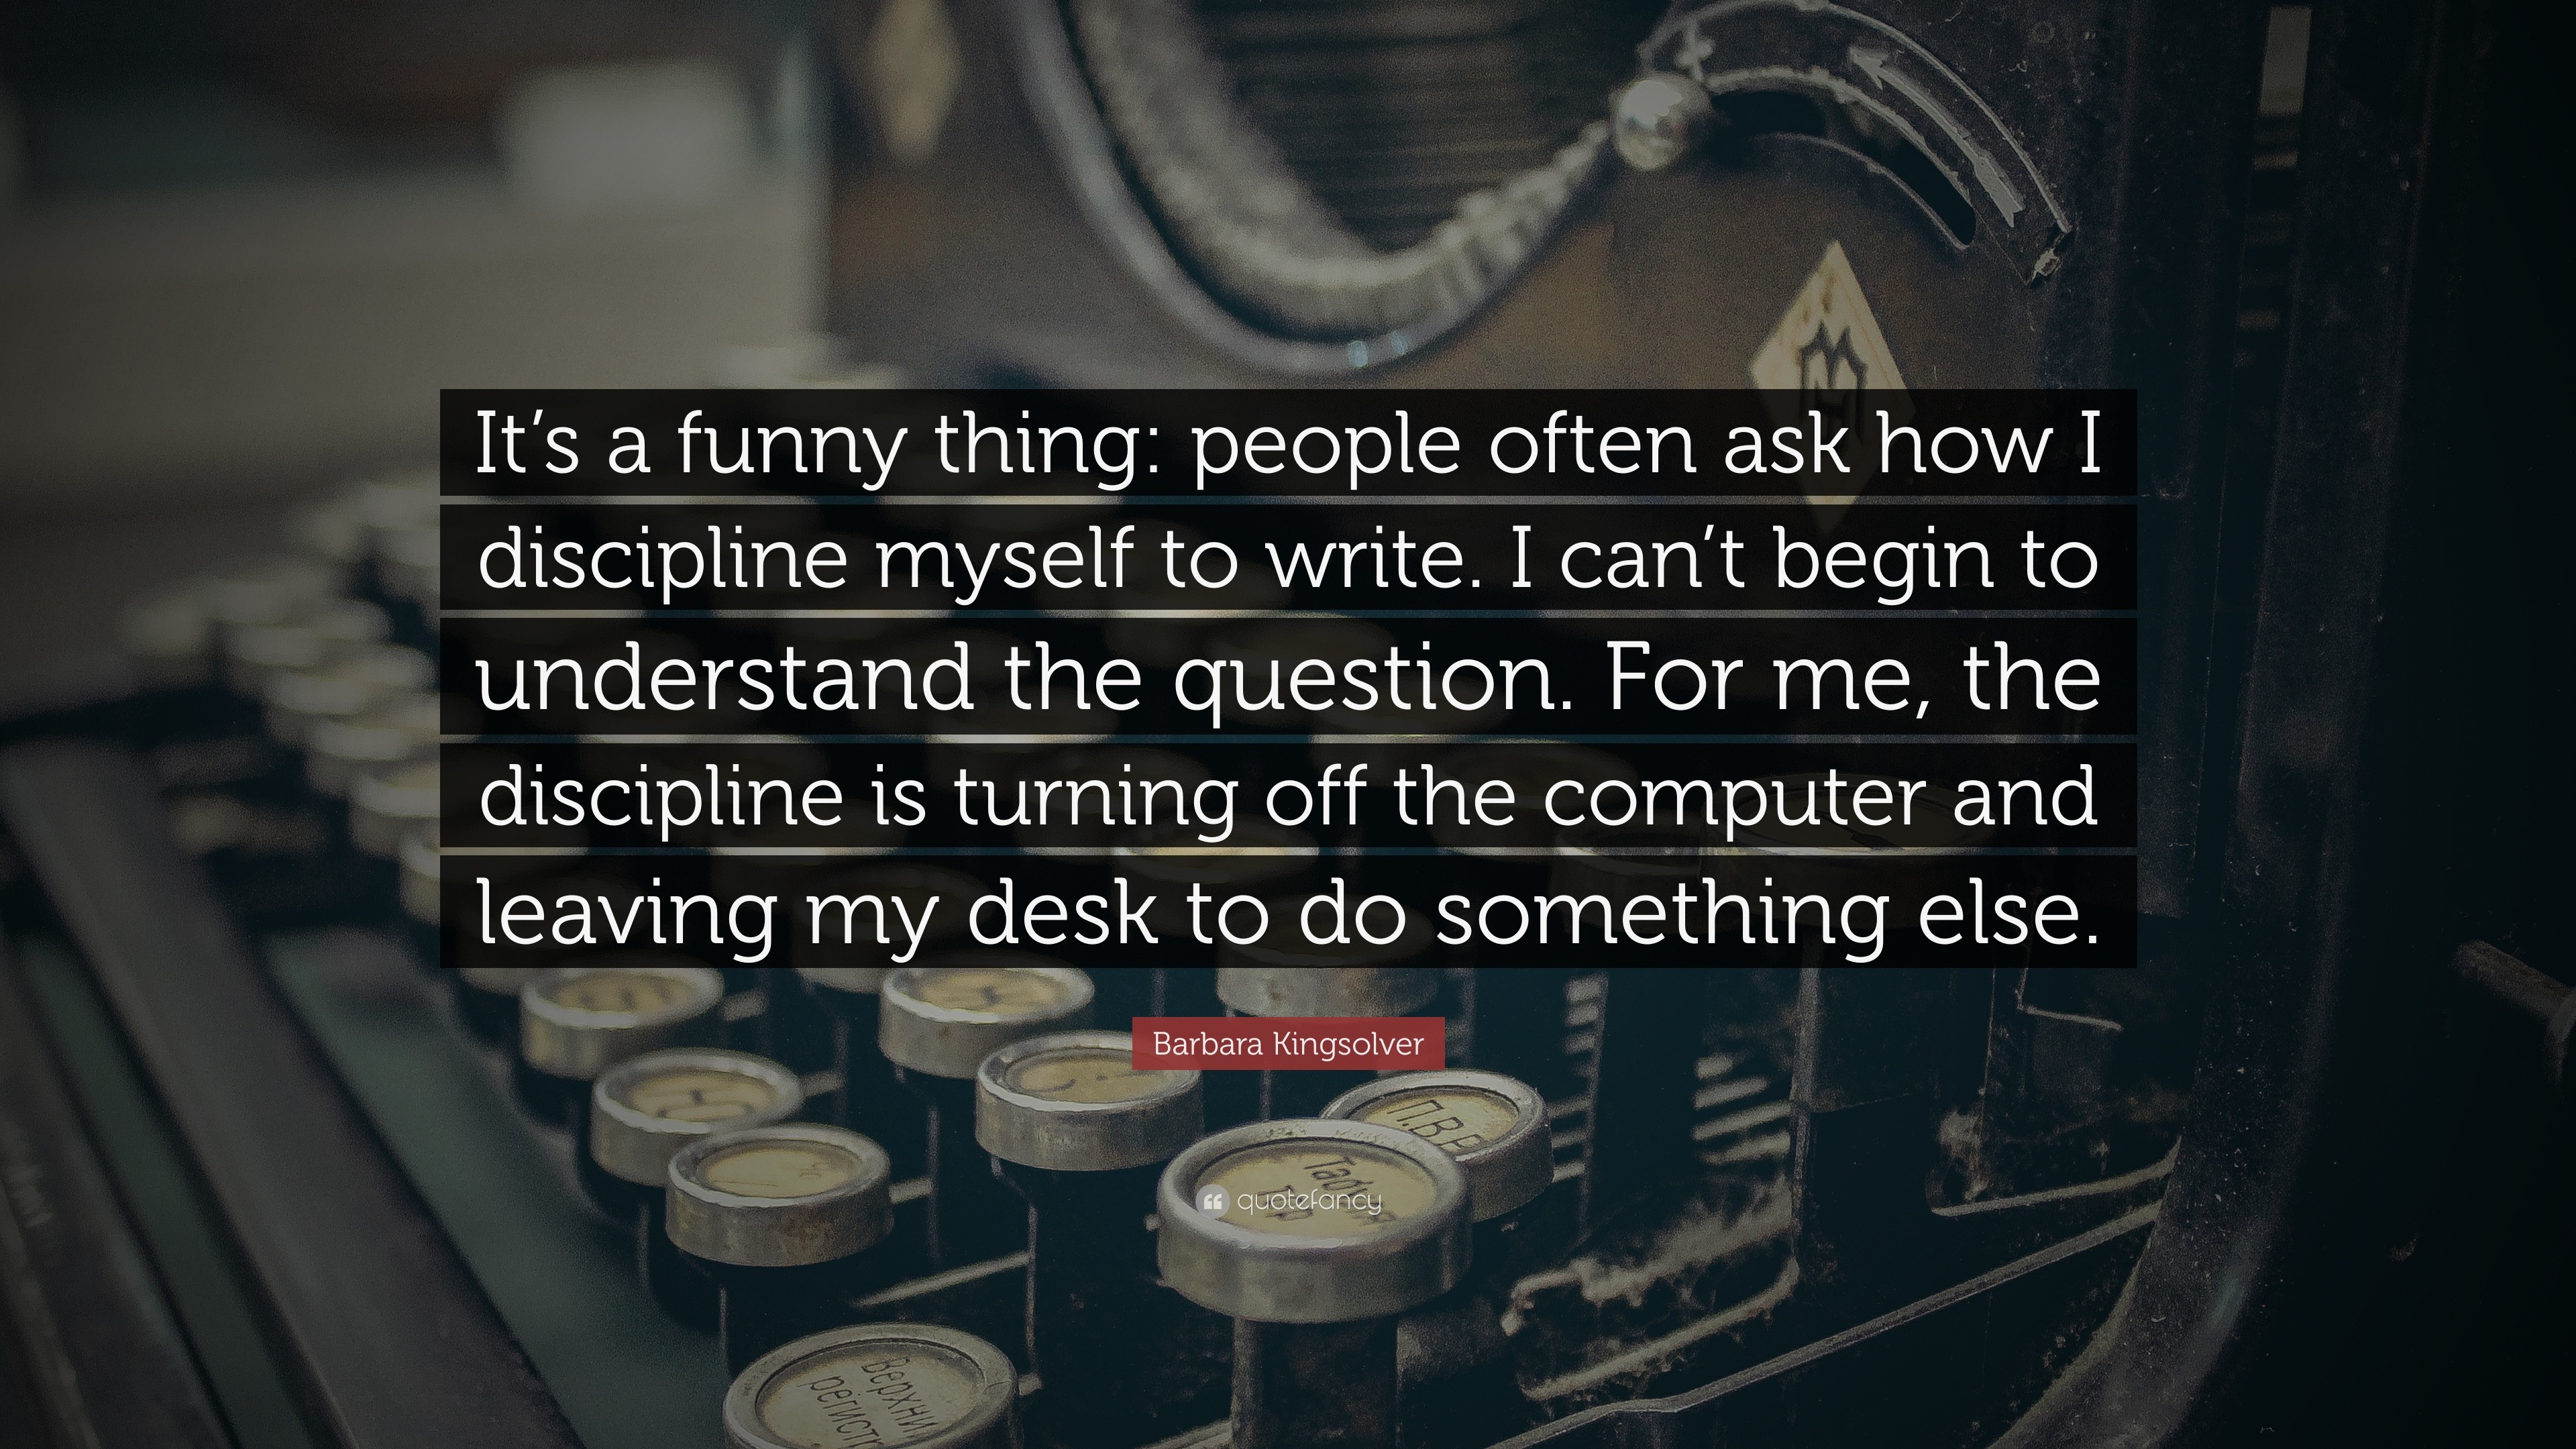 Barbara Kingsolver Quote: “It's a funny thing: people often ask how I  discipline myself to write. I can't begin to understand the question. For  me,...”